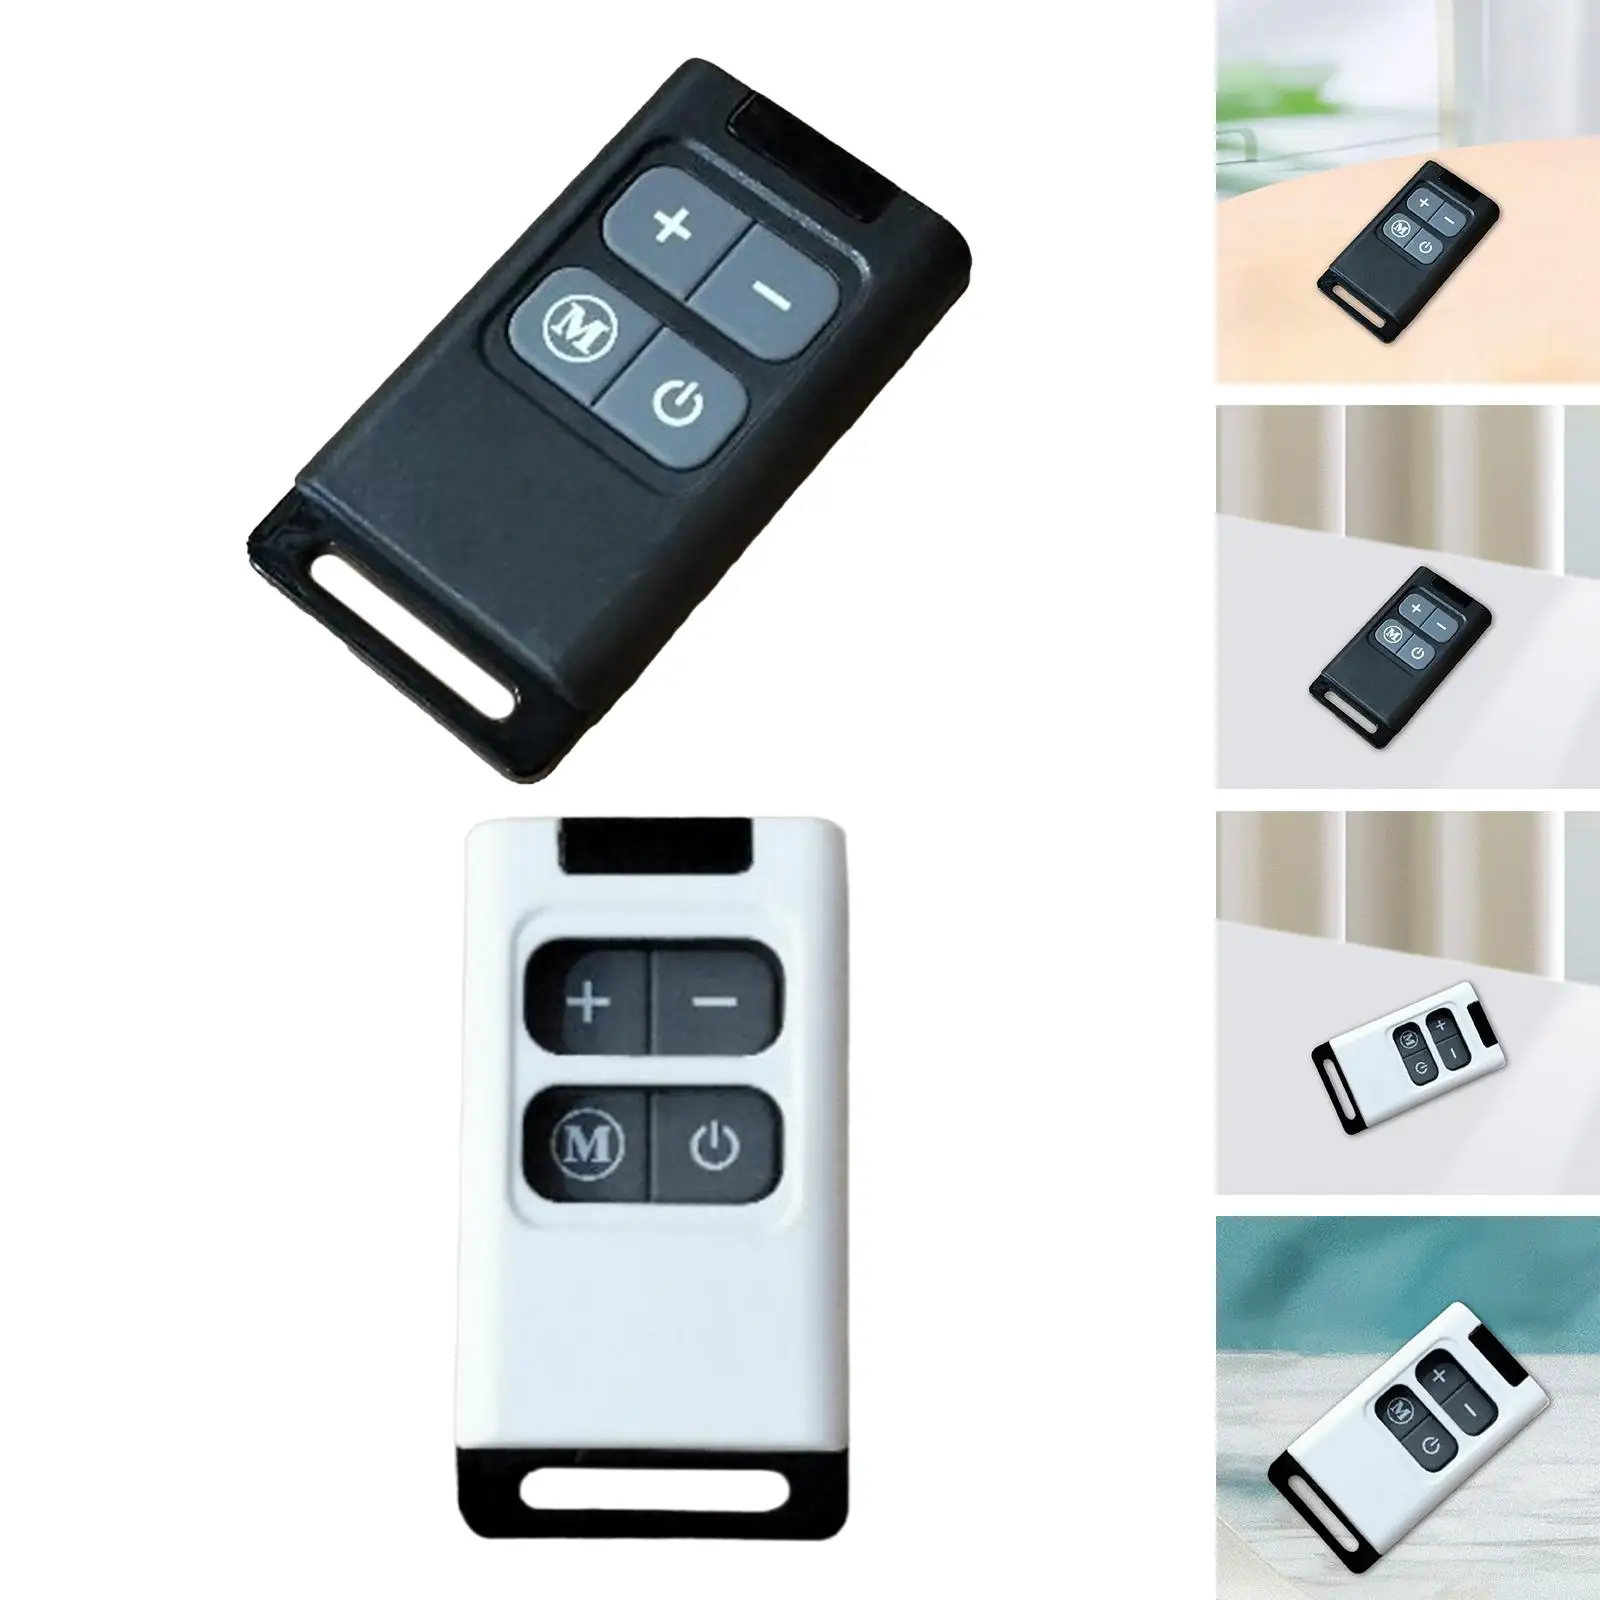 Car Parking Heater Remote Control Universal for Heater Controller Vehicle Air Parking Heater Vehicle RV Heating Accessories